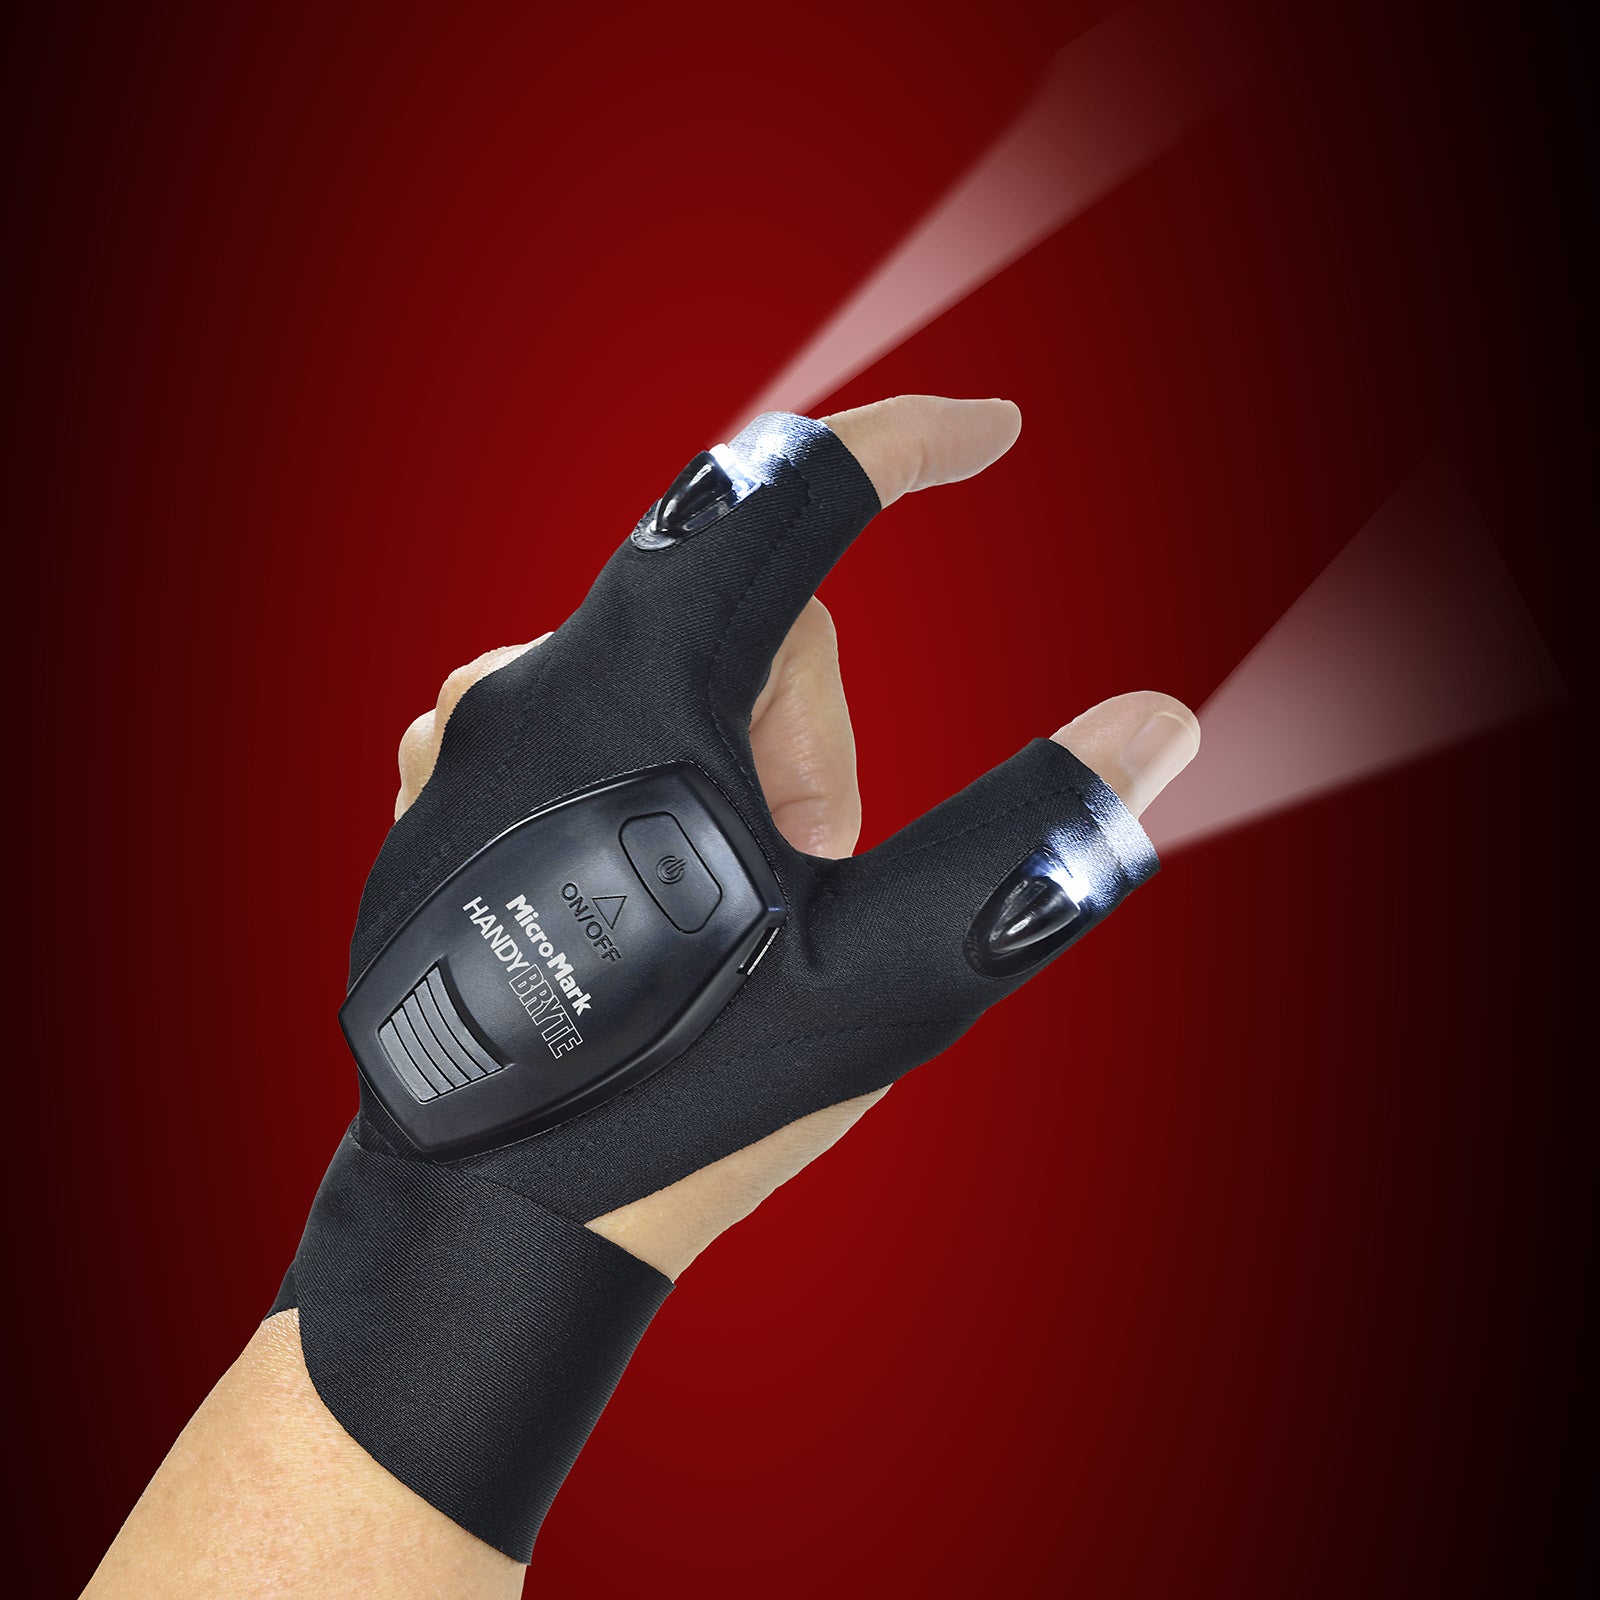 HandyBRYTE Glove-Mounted LED Light System by Micro-Mark